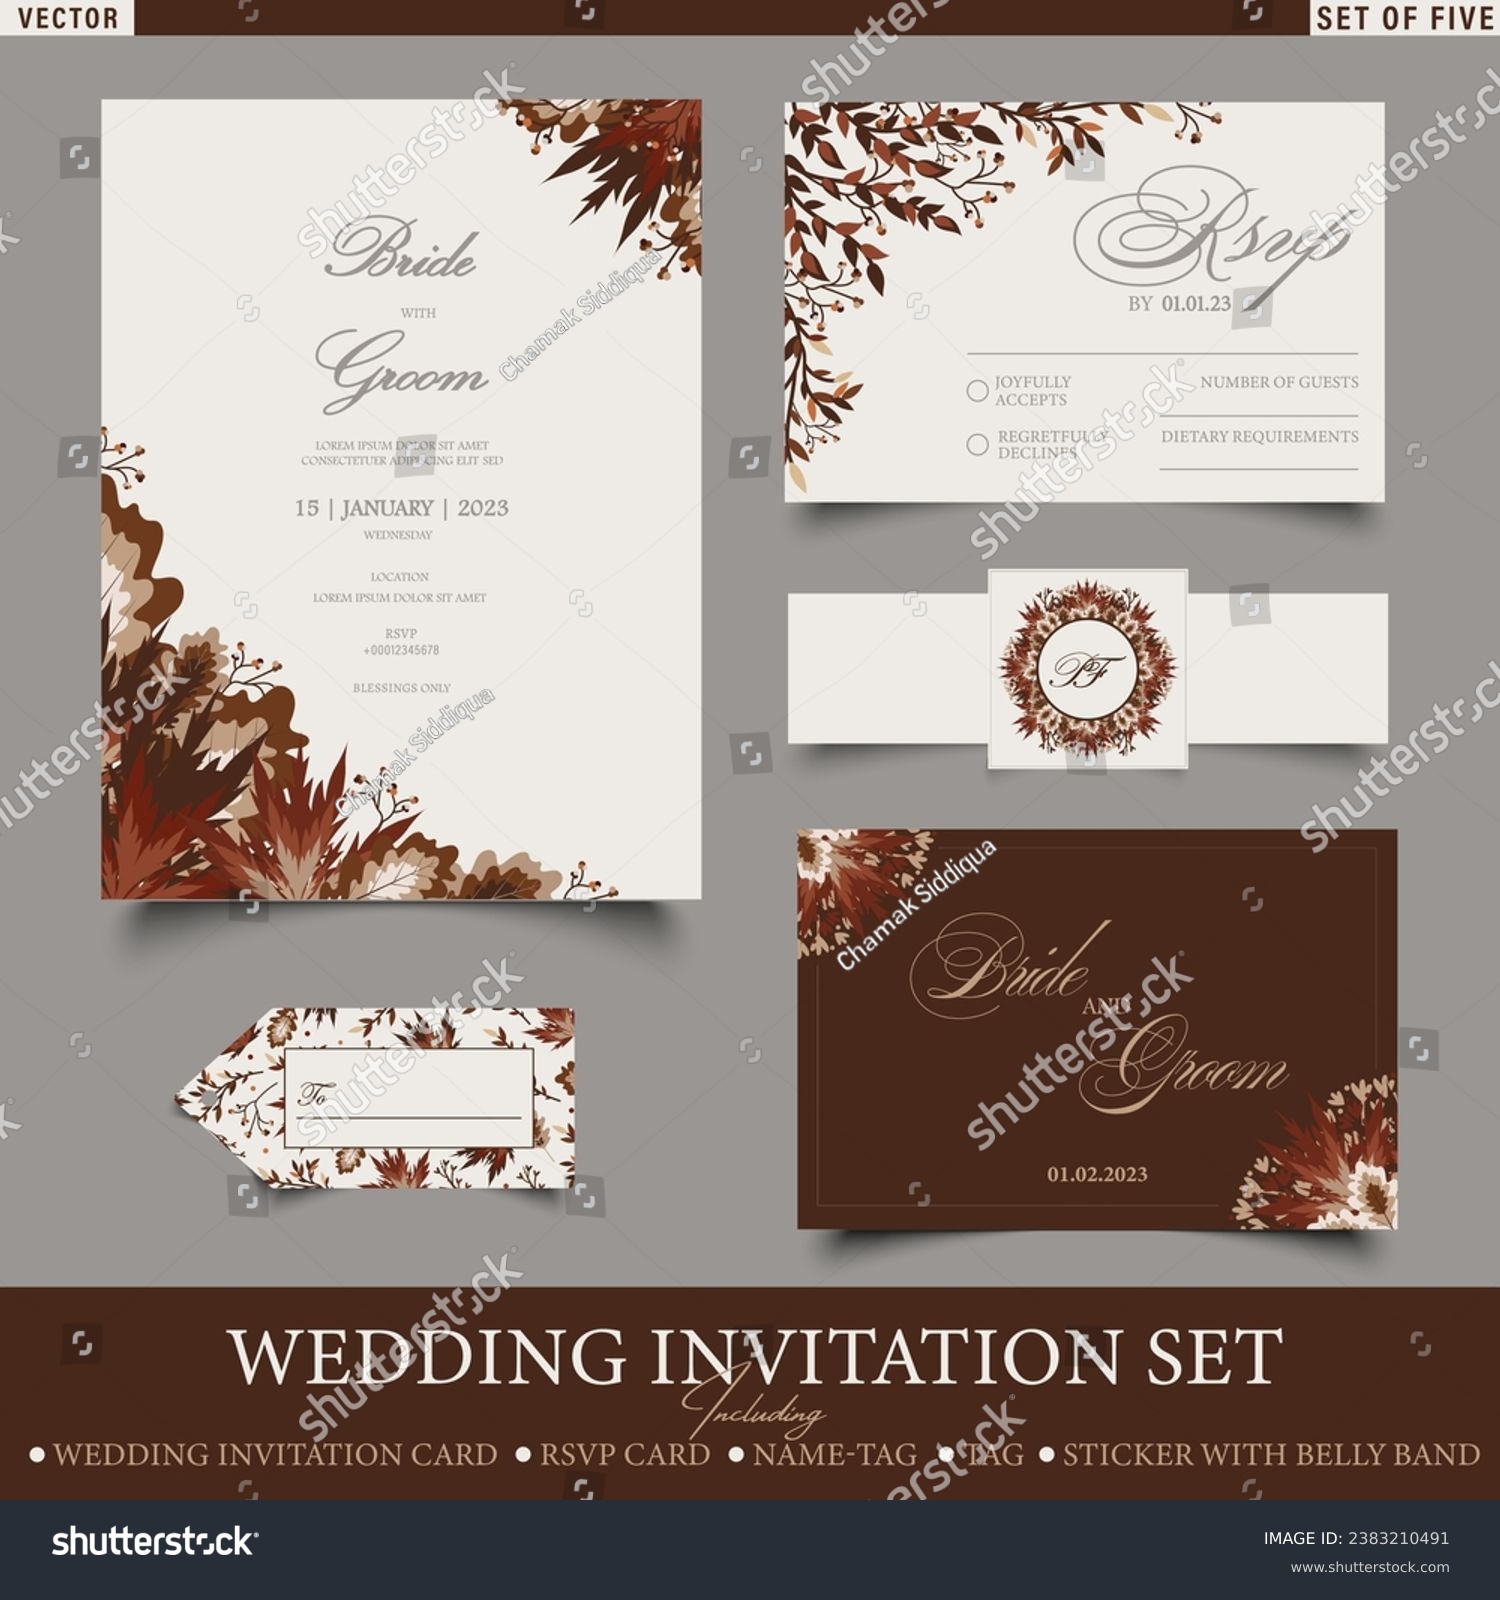 SVG of Modern Wedding Invitation set including Wedding Card, RSVP Card, Name-card, Thank you card, sticker with belly Band and Tag. Set of Five Invitation Card Templates in Fall colors with floral ornaments. svg